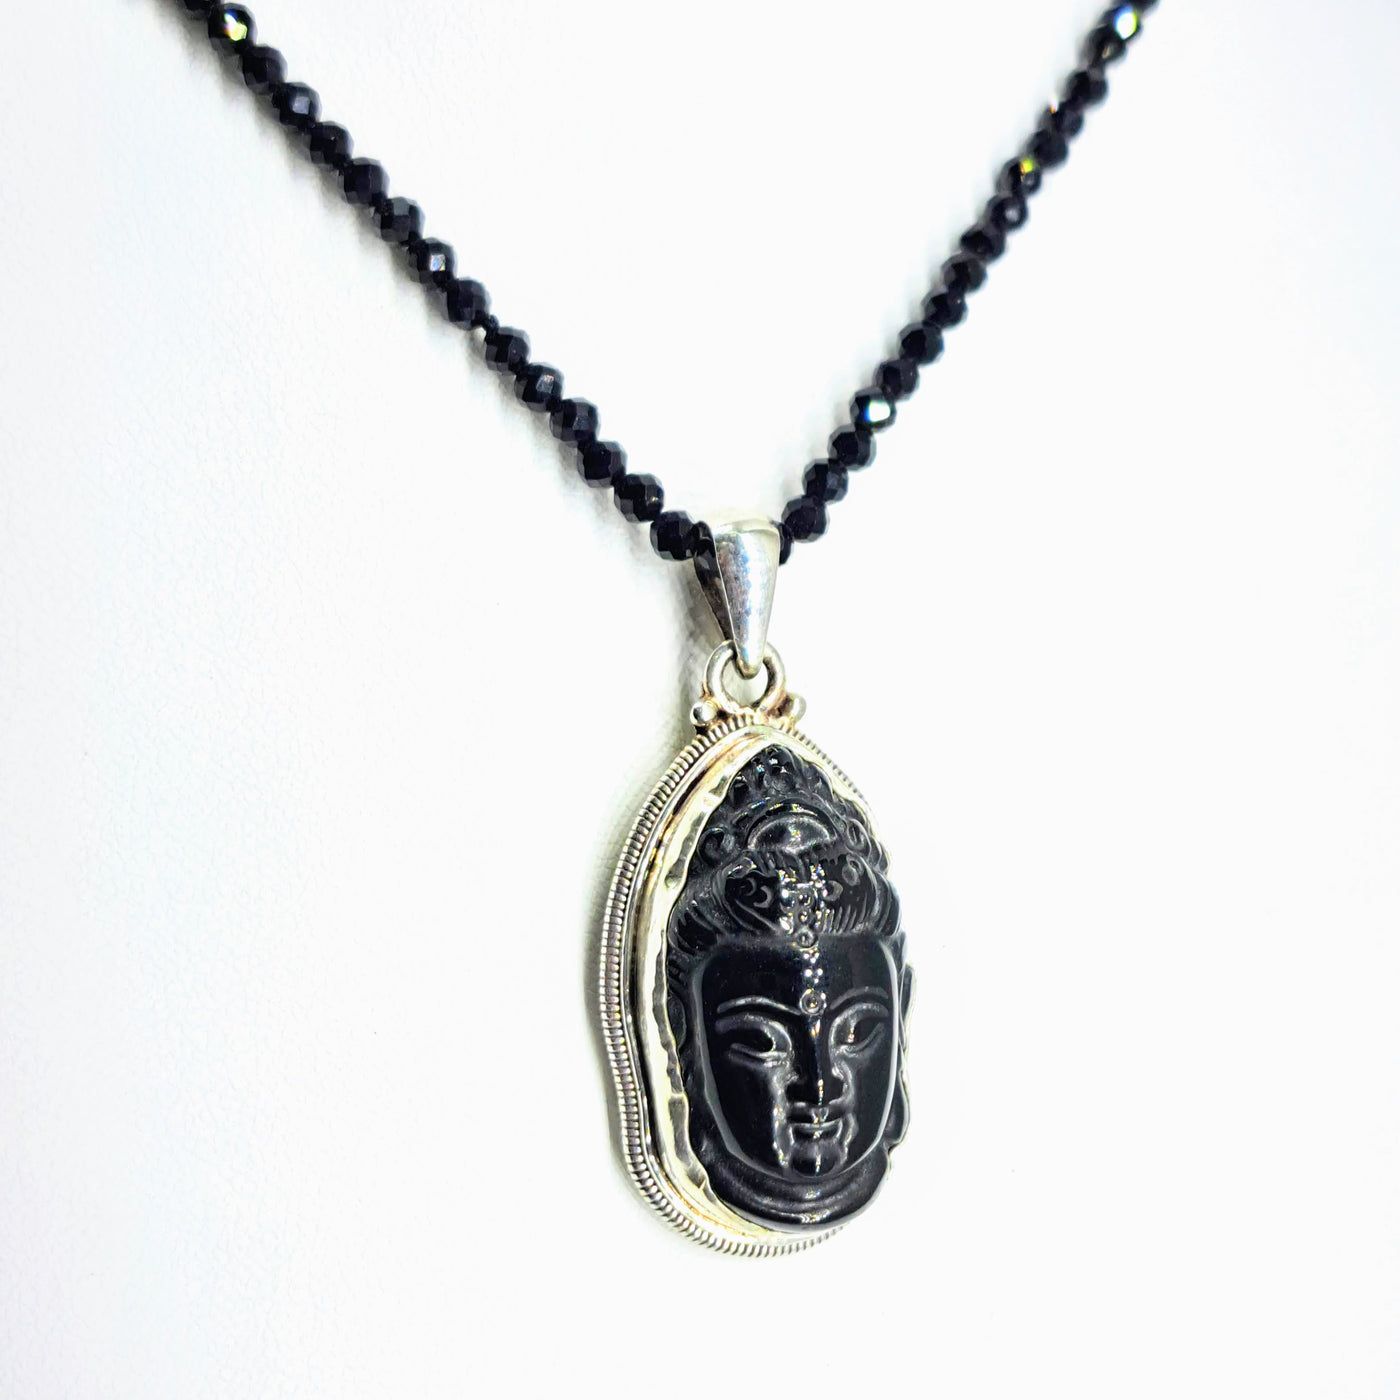 "Quan Yin" Pendant Necklace - Obsidian, Spinel, Sterling.